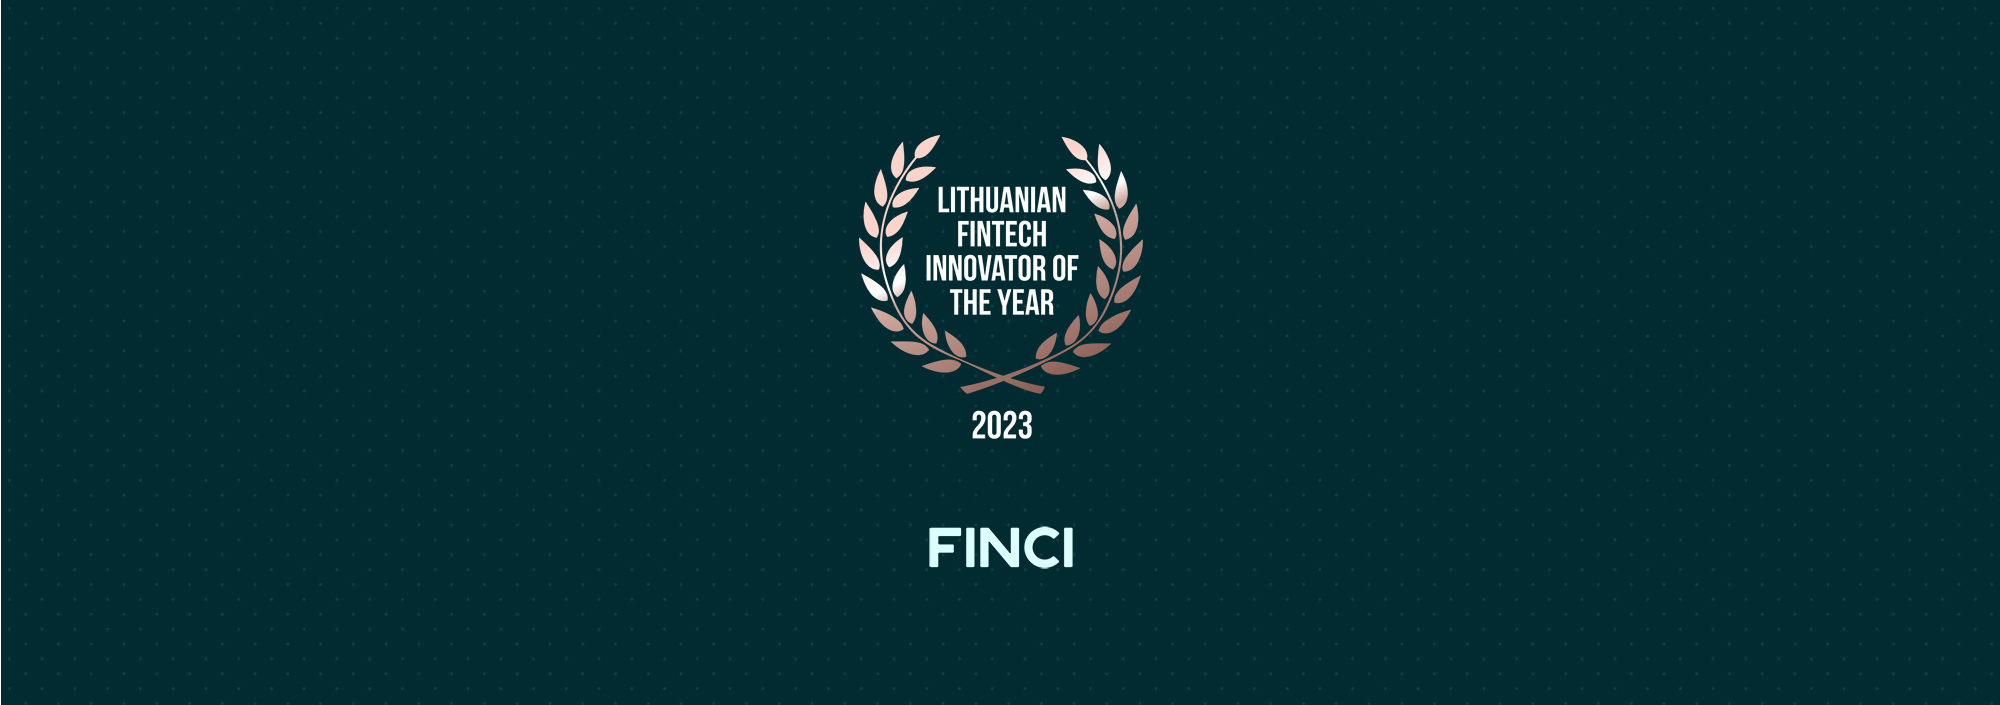 FINCI - Awarded Fintech Innovator Of The Year